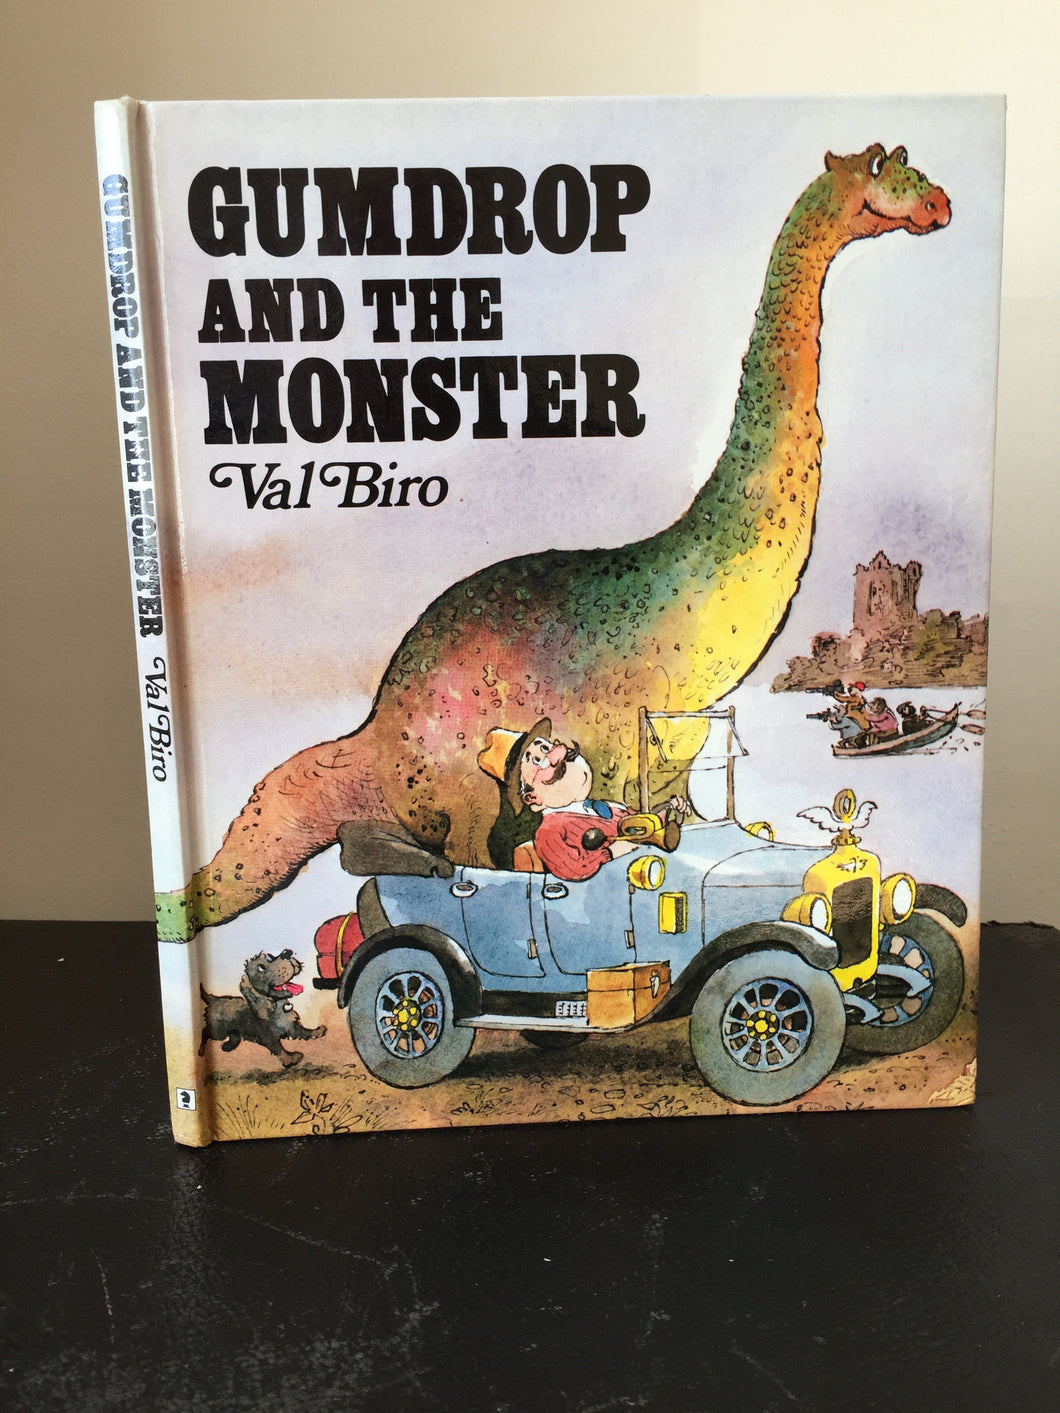 Gumdrop and the Monster